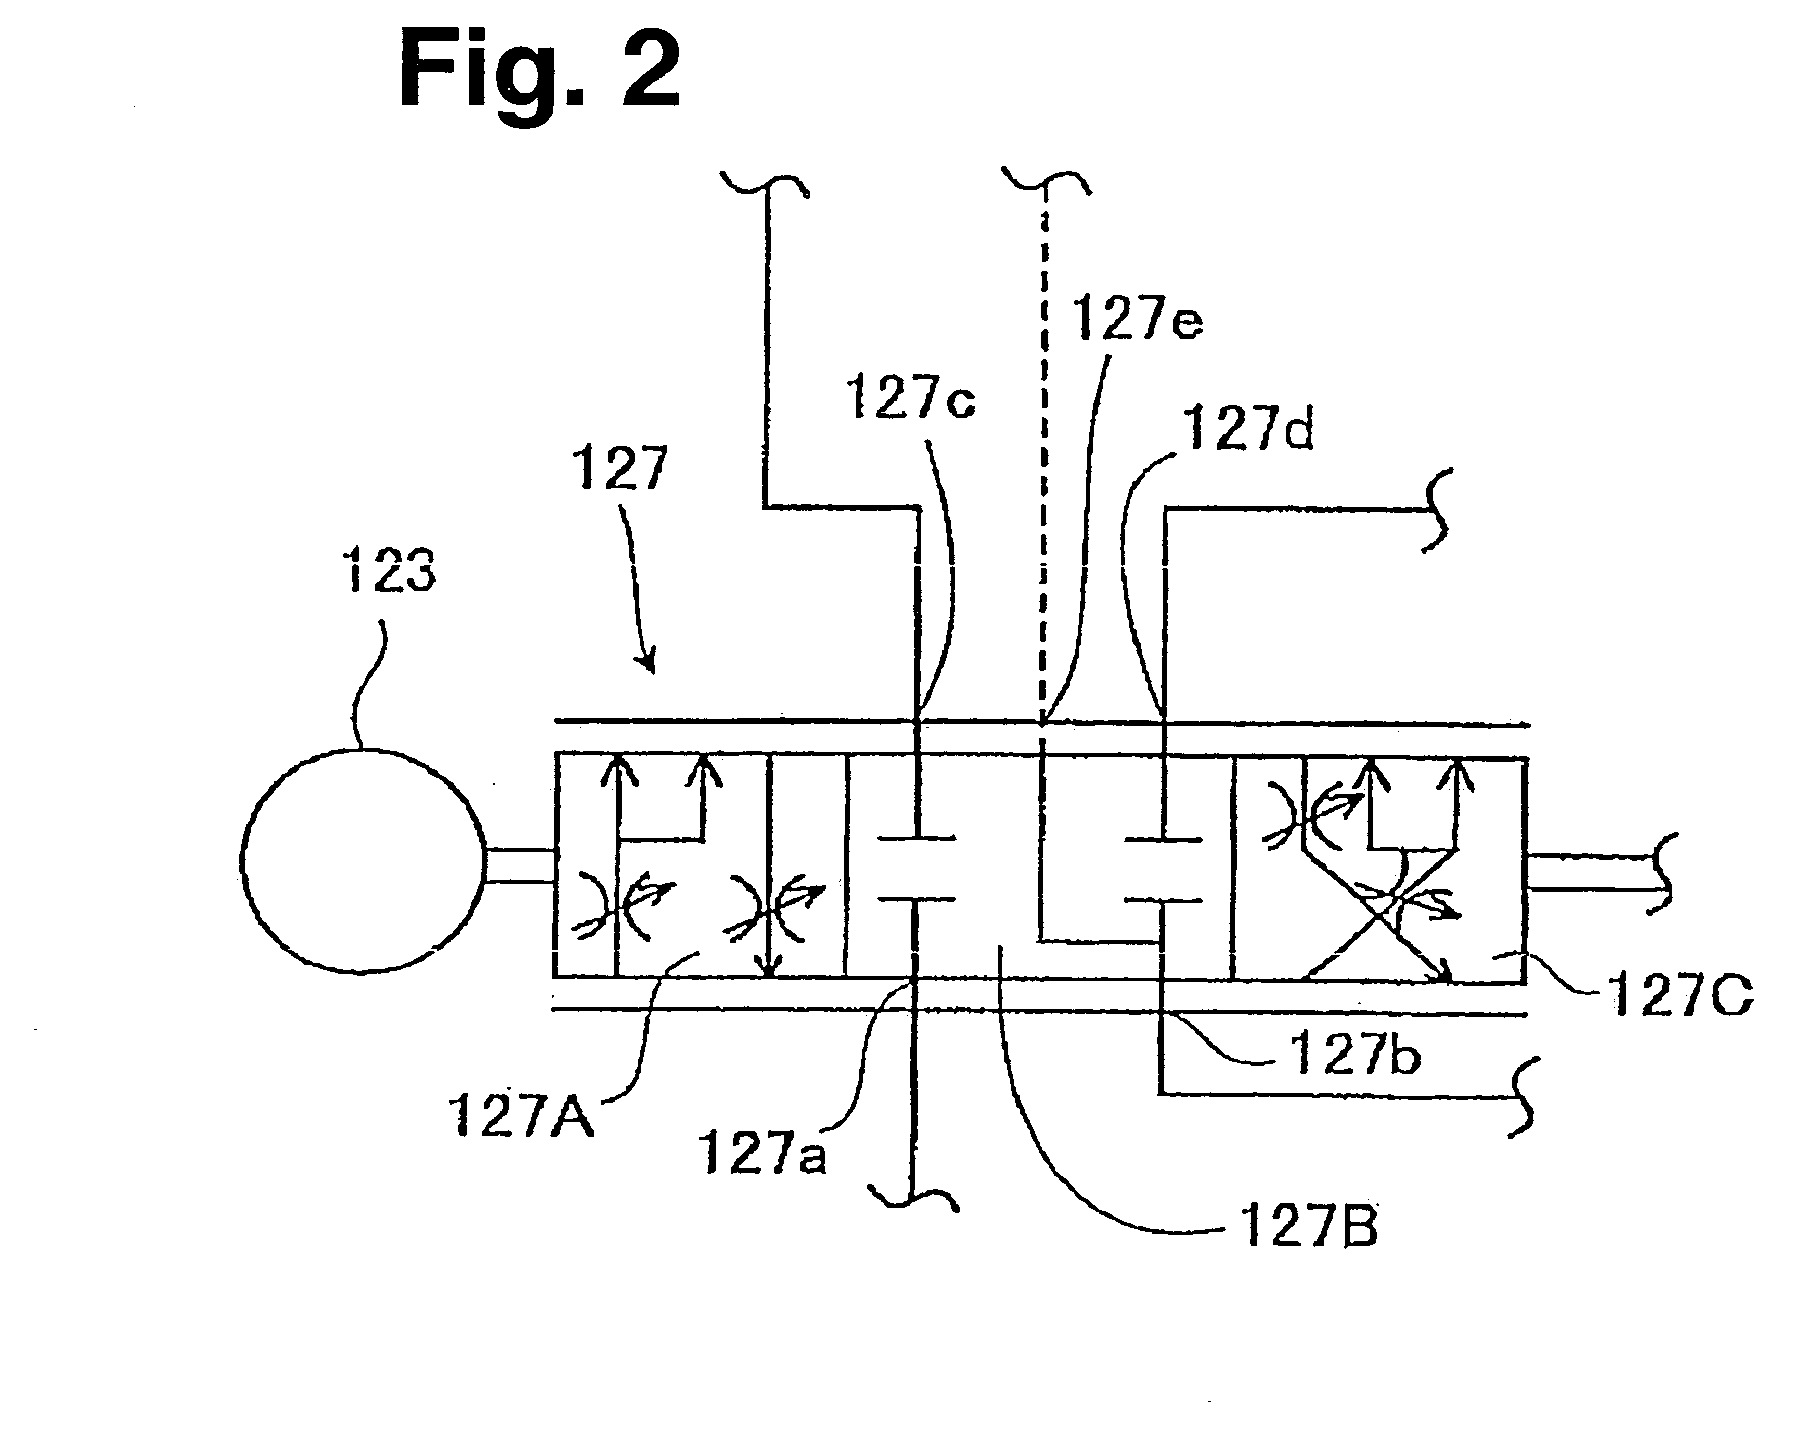 Electro-hydraulic actuation system